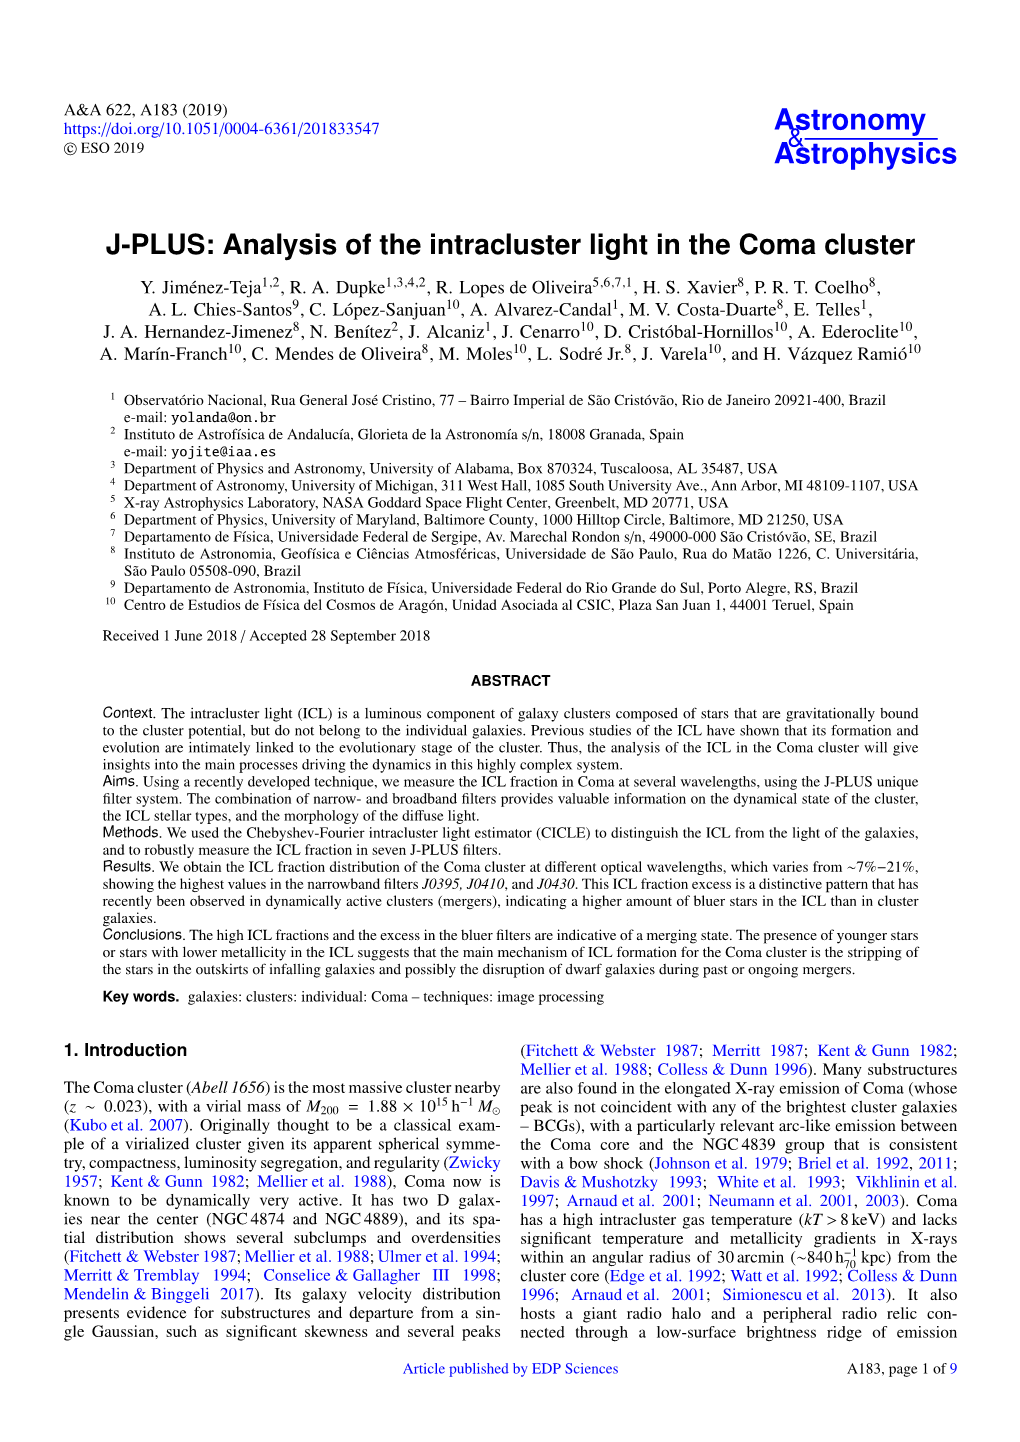 J-PLUS: Analysis of the Intracluster Light in the Coma Cluster Y